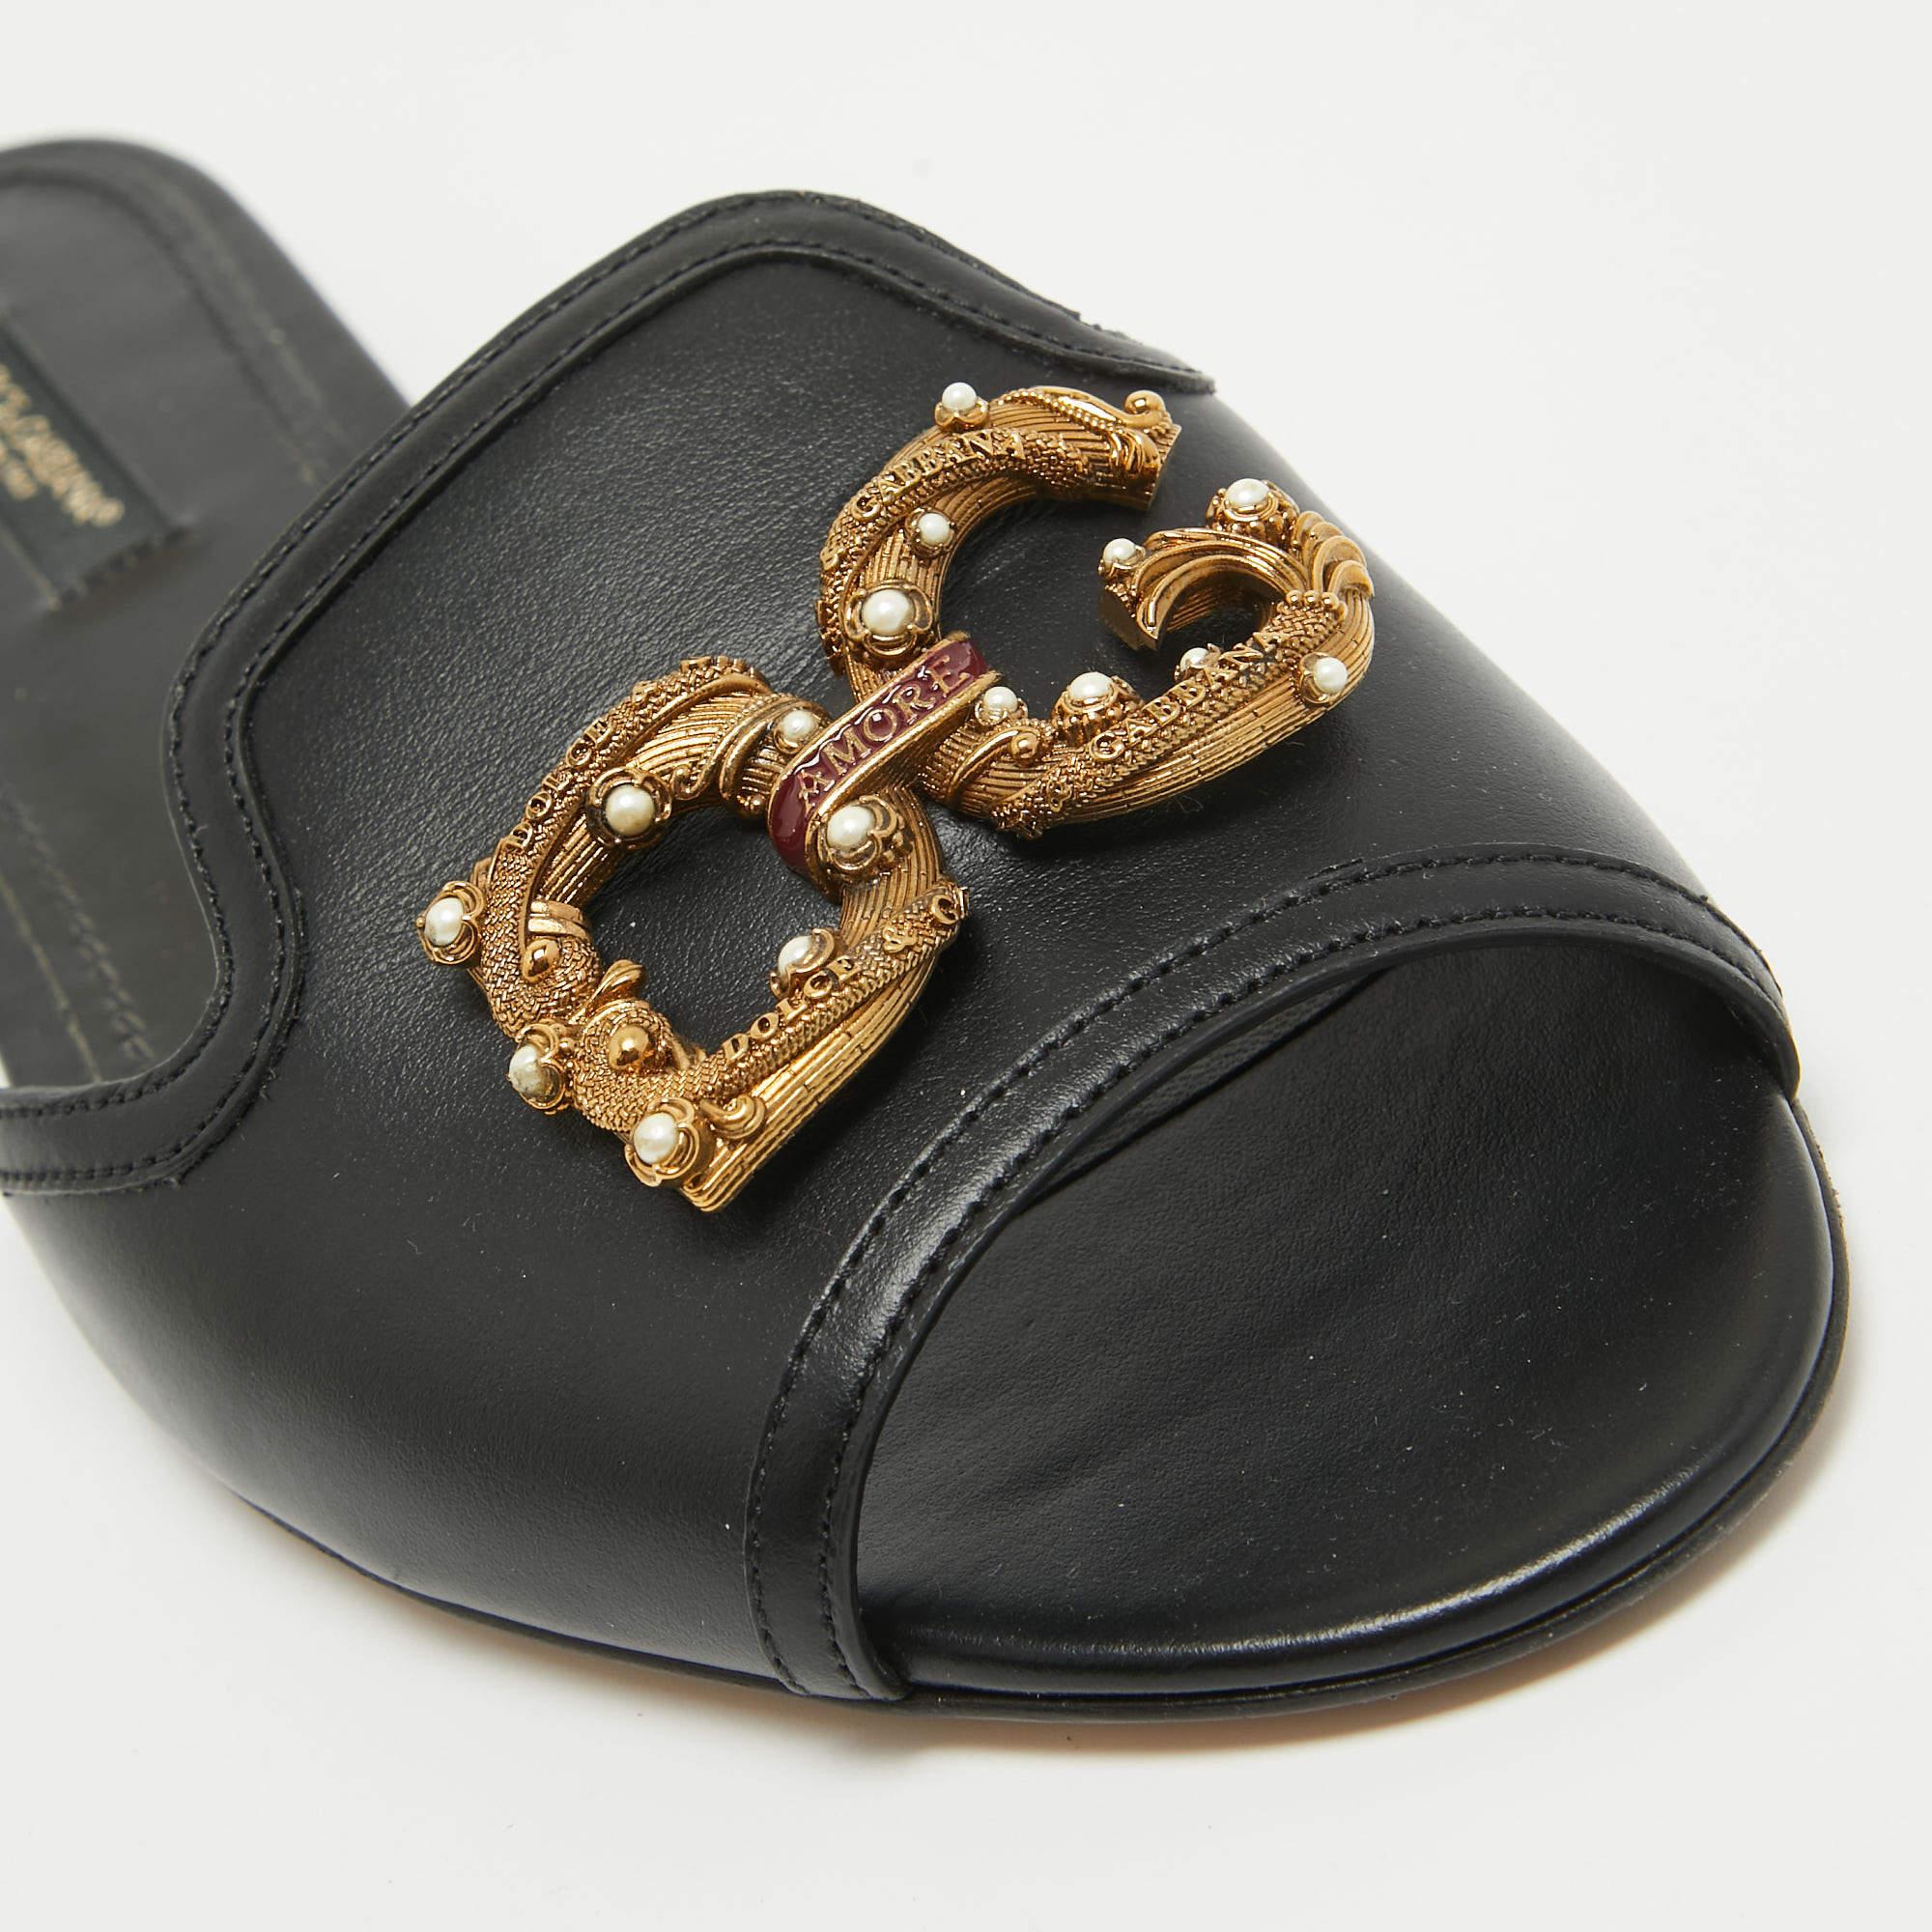 Frame your feet with these Dolce & Gabbana flat sandals. Created using the best materials, the flats are perfect with short, midi, and maxi hemlines.

Includes: Original Box